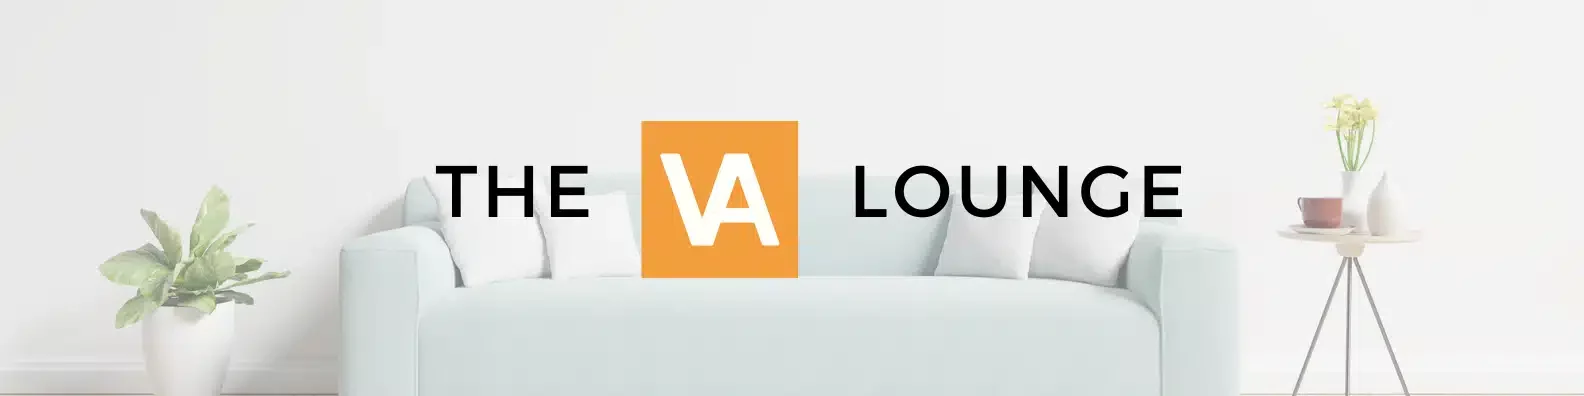 The Story behind the VA Lounge